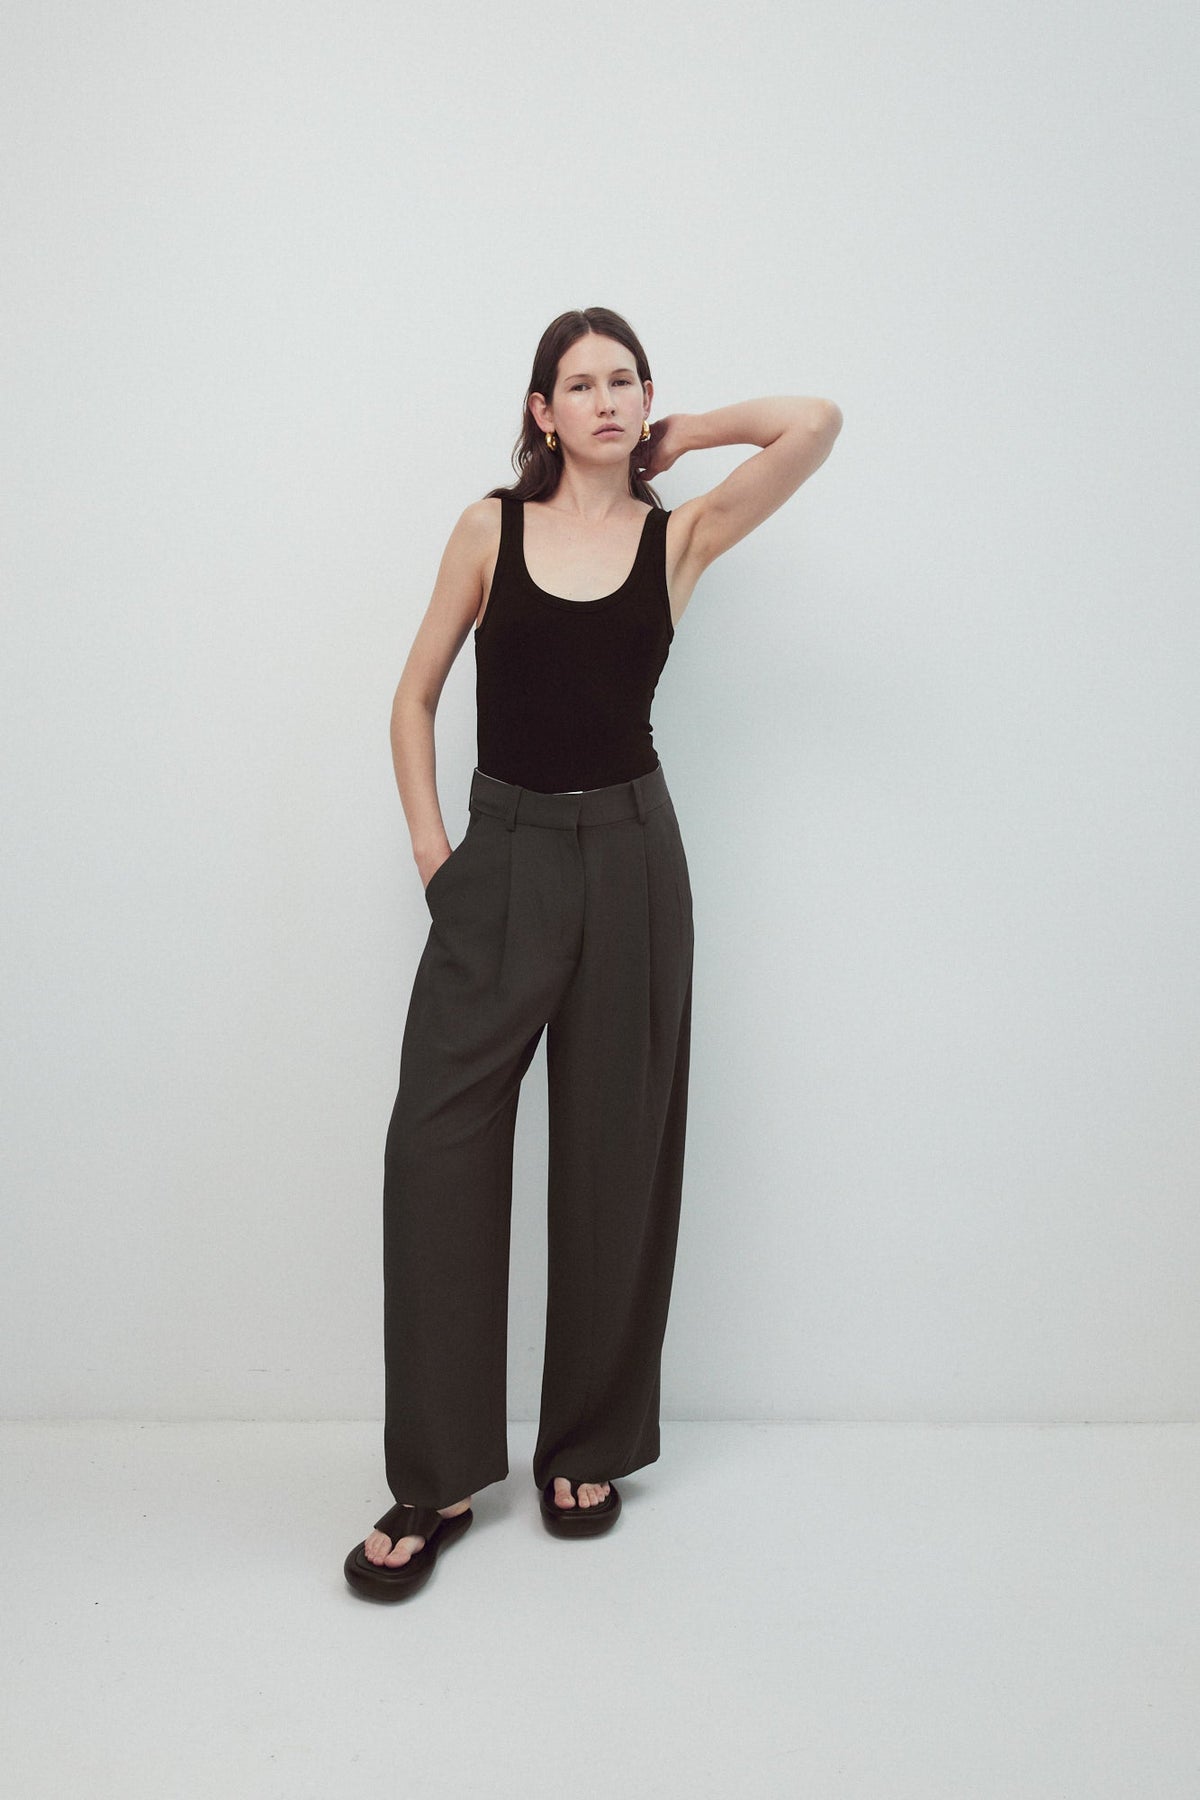 BLANCA Melina Pants in Slate – Shop at the Mix